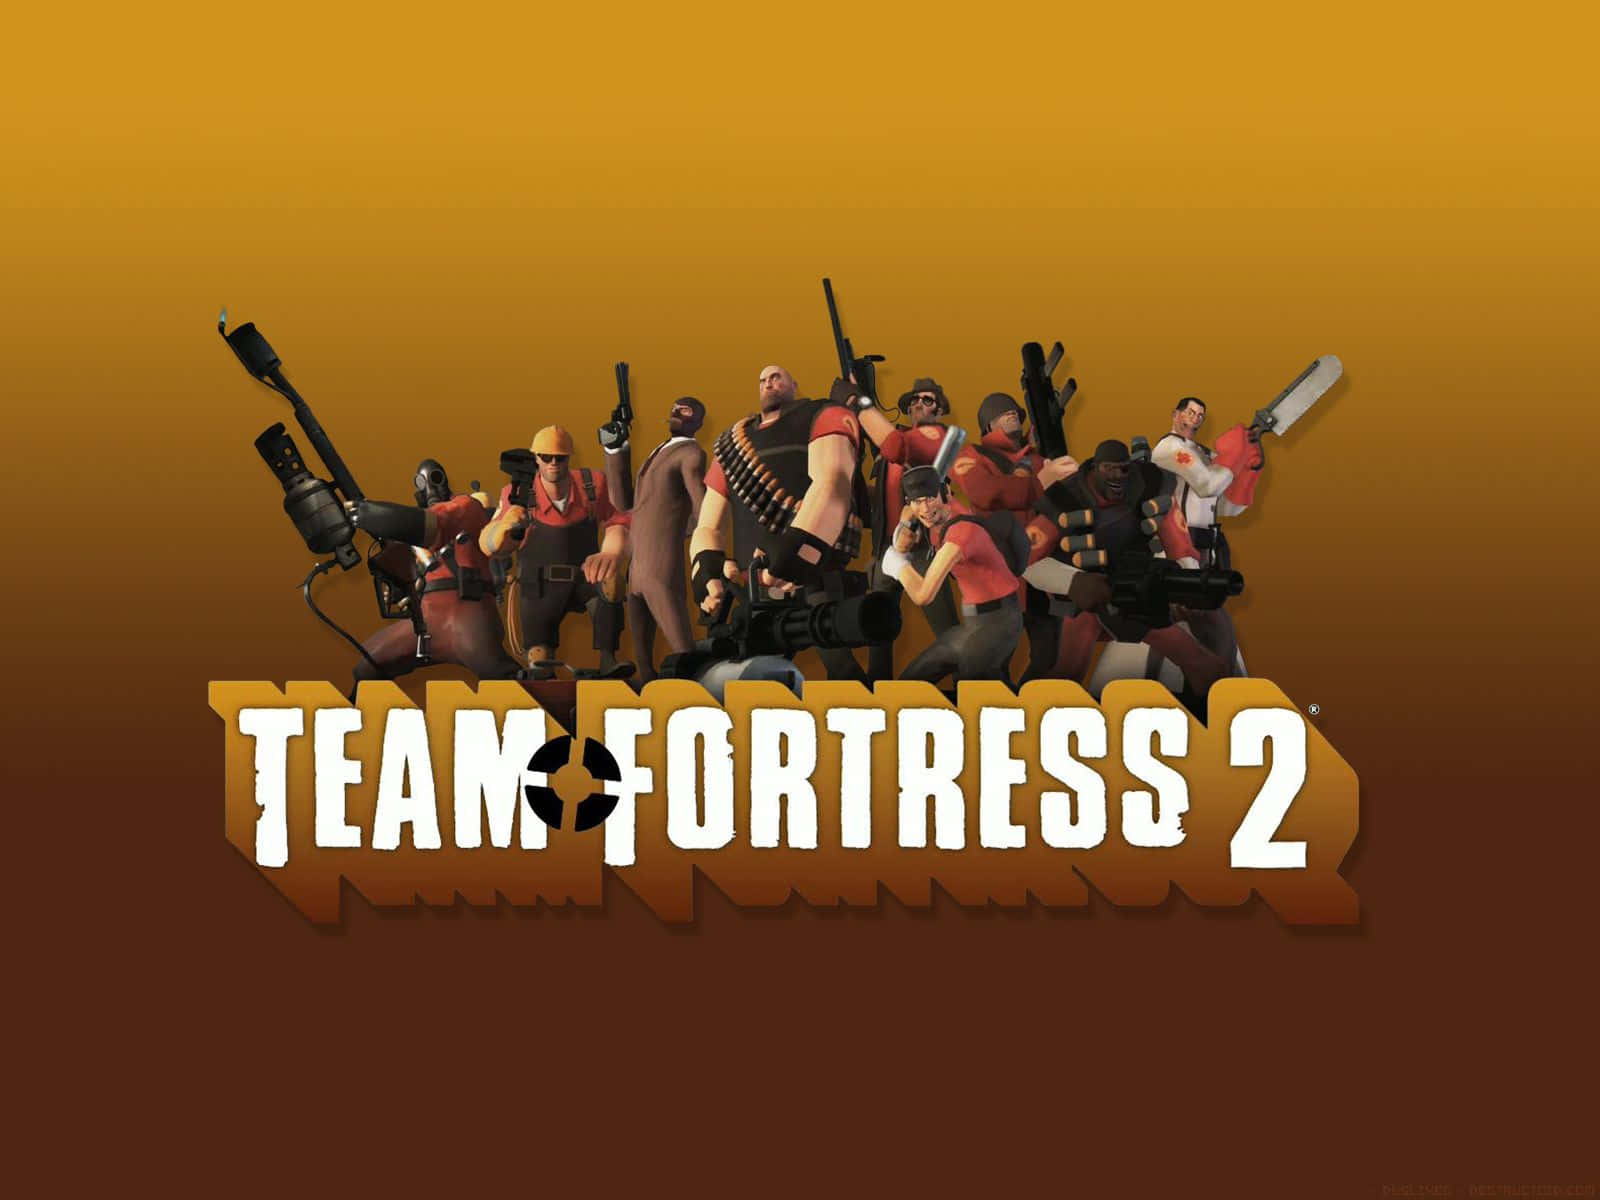 The Definitive Team Fortress 2 Line-Up Wallpaper